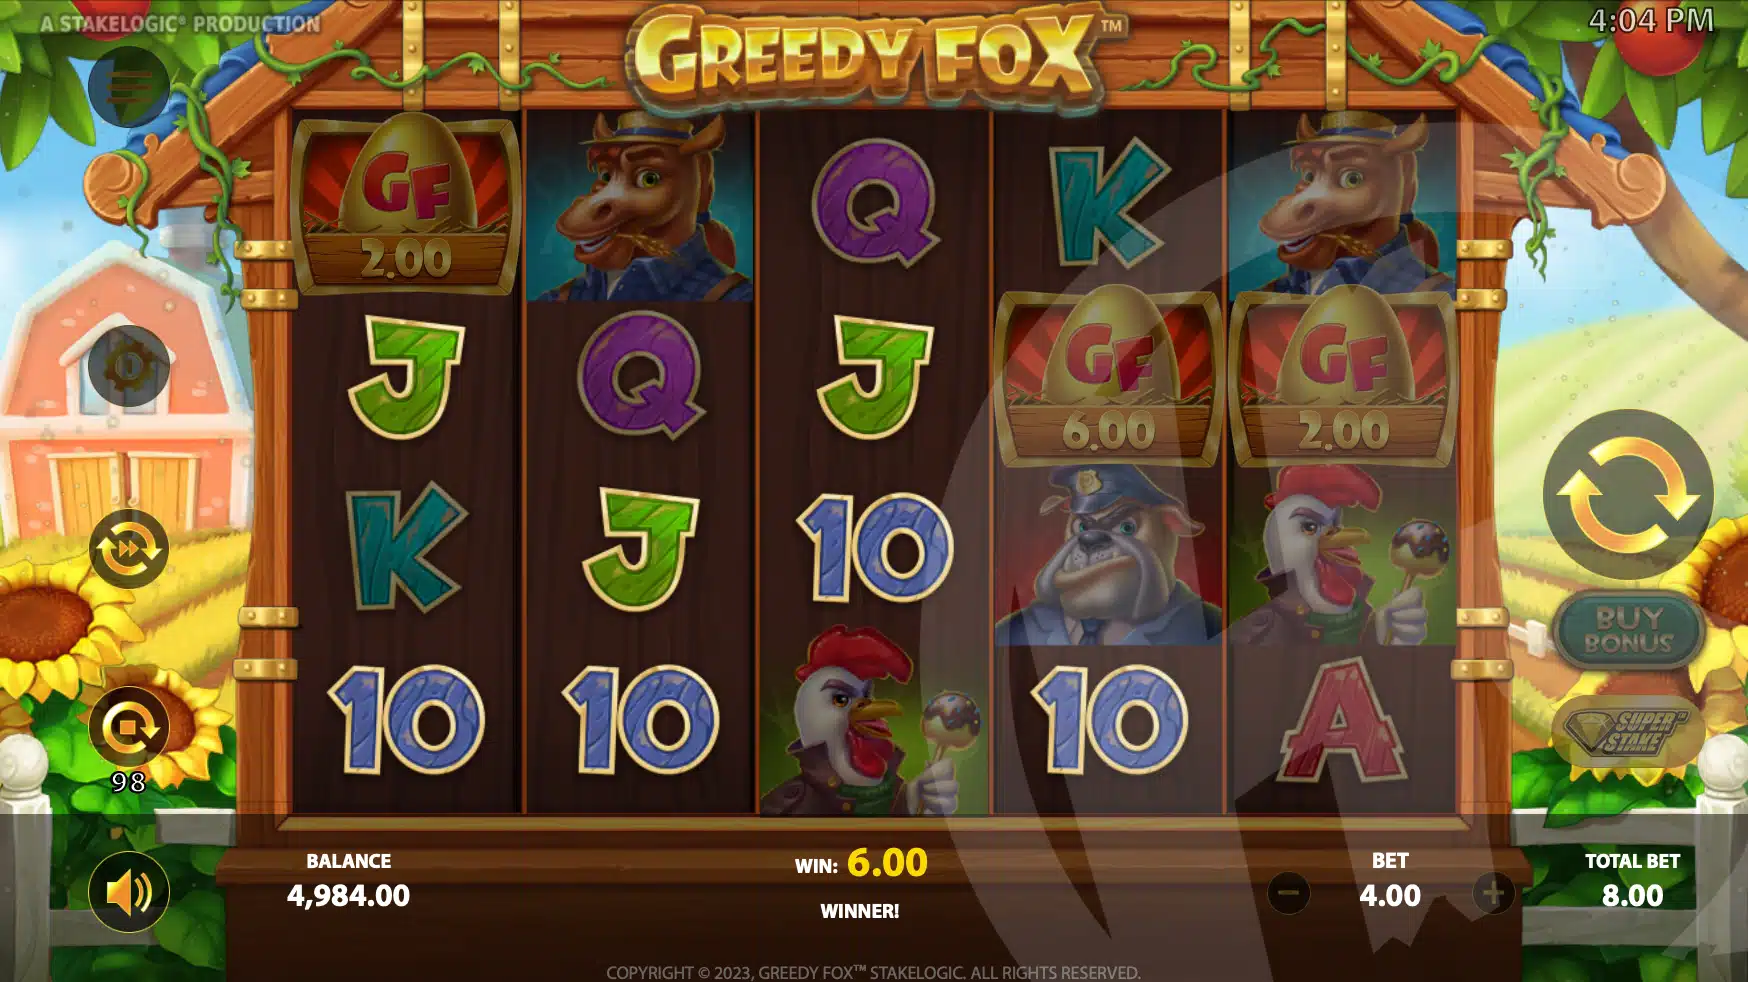 Greedy Fox Offers Players 20 Fixed Win Lines